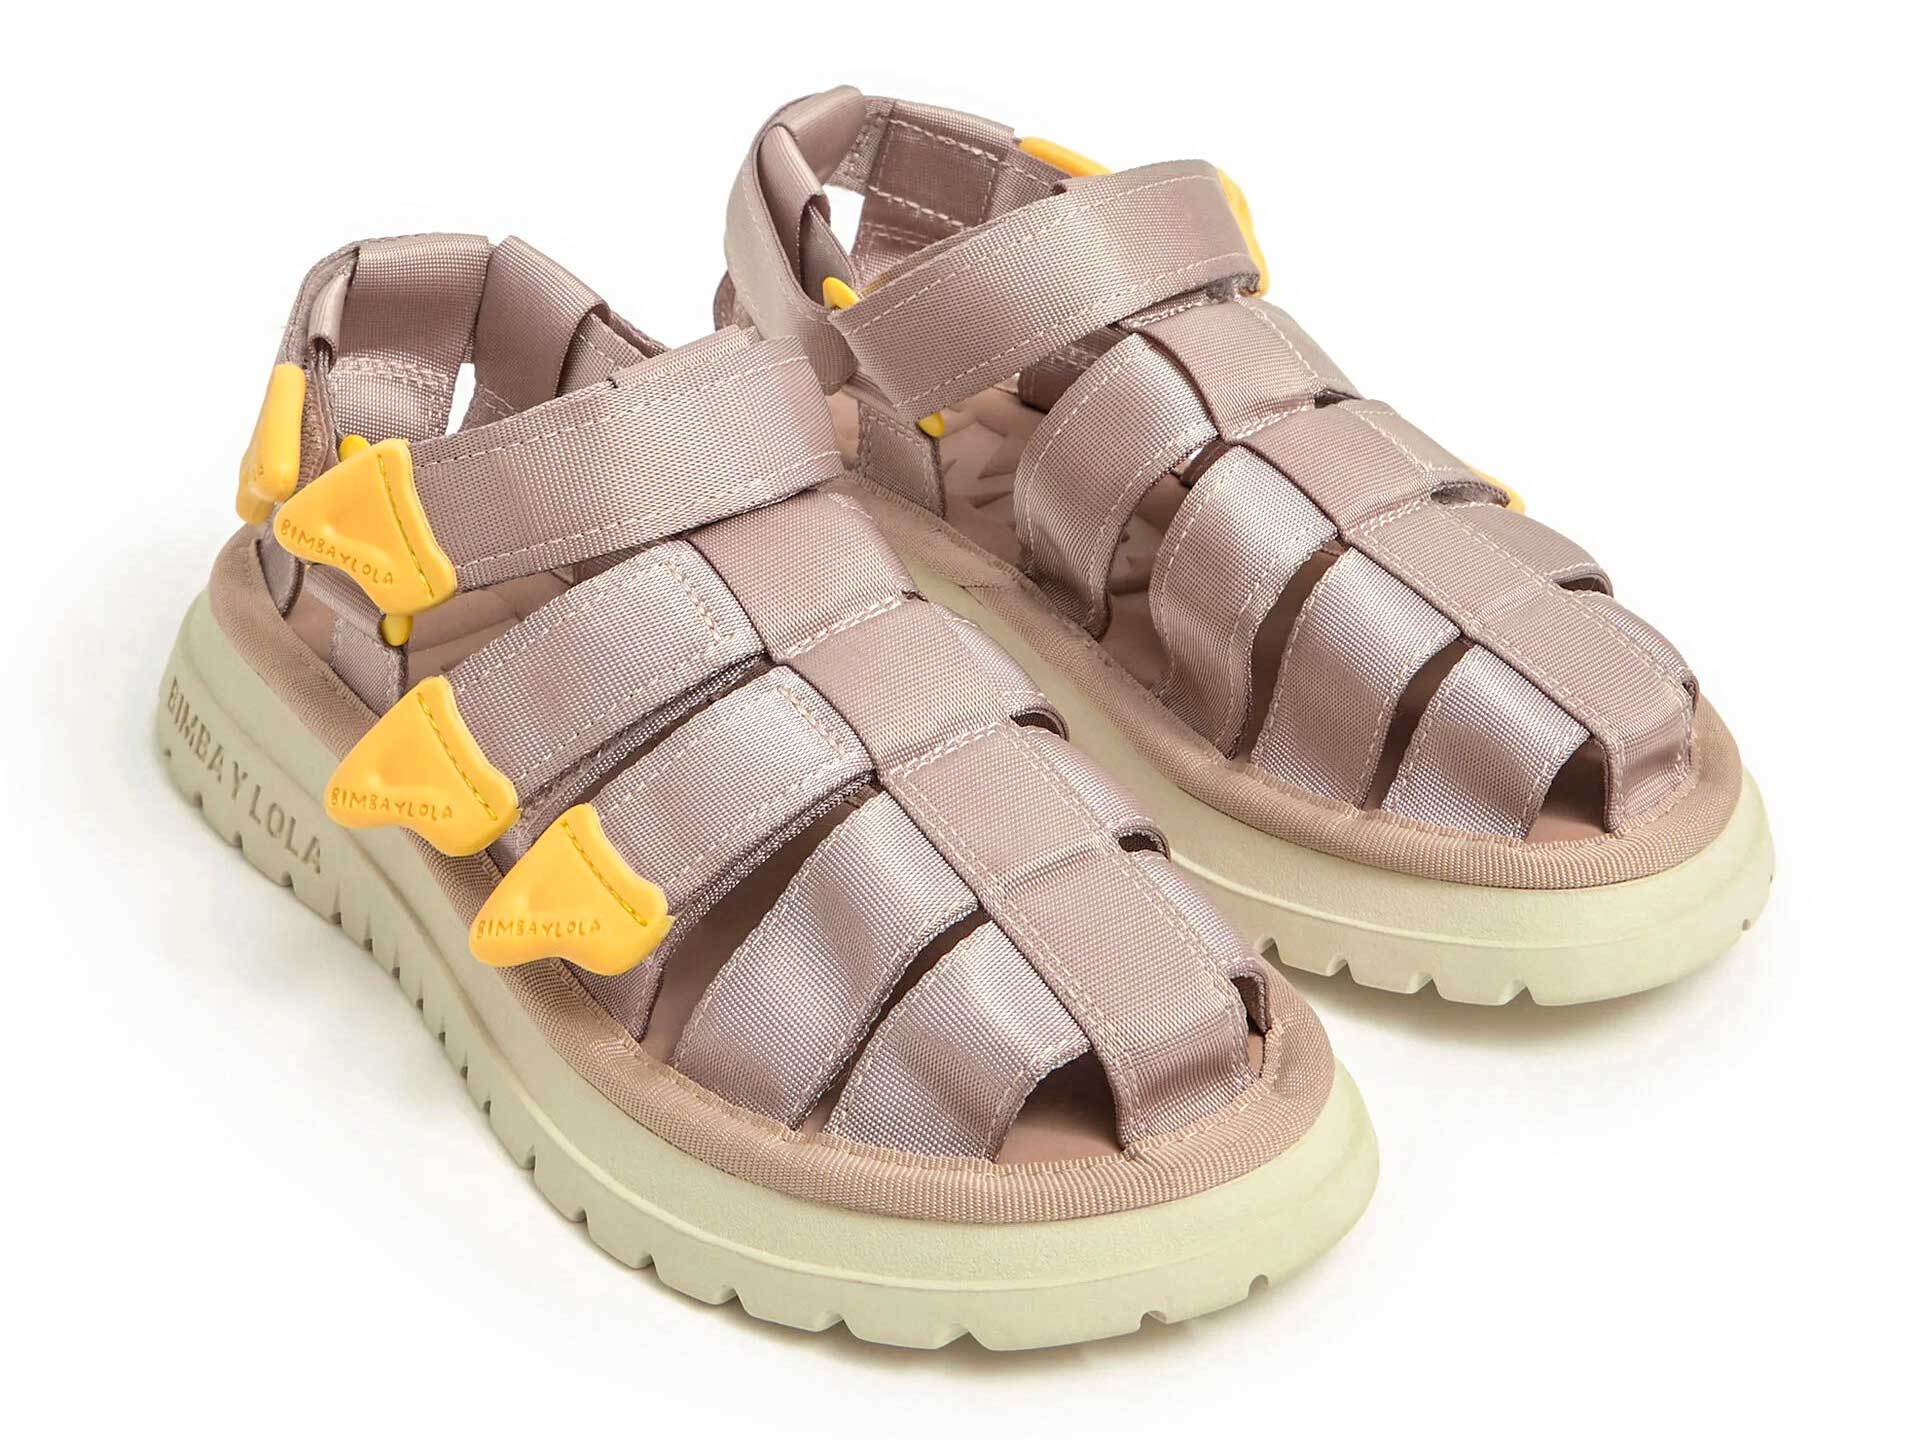 Crabeater or franciscan sandals, will they be the favorite summer sandals?